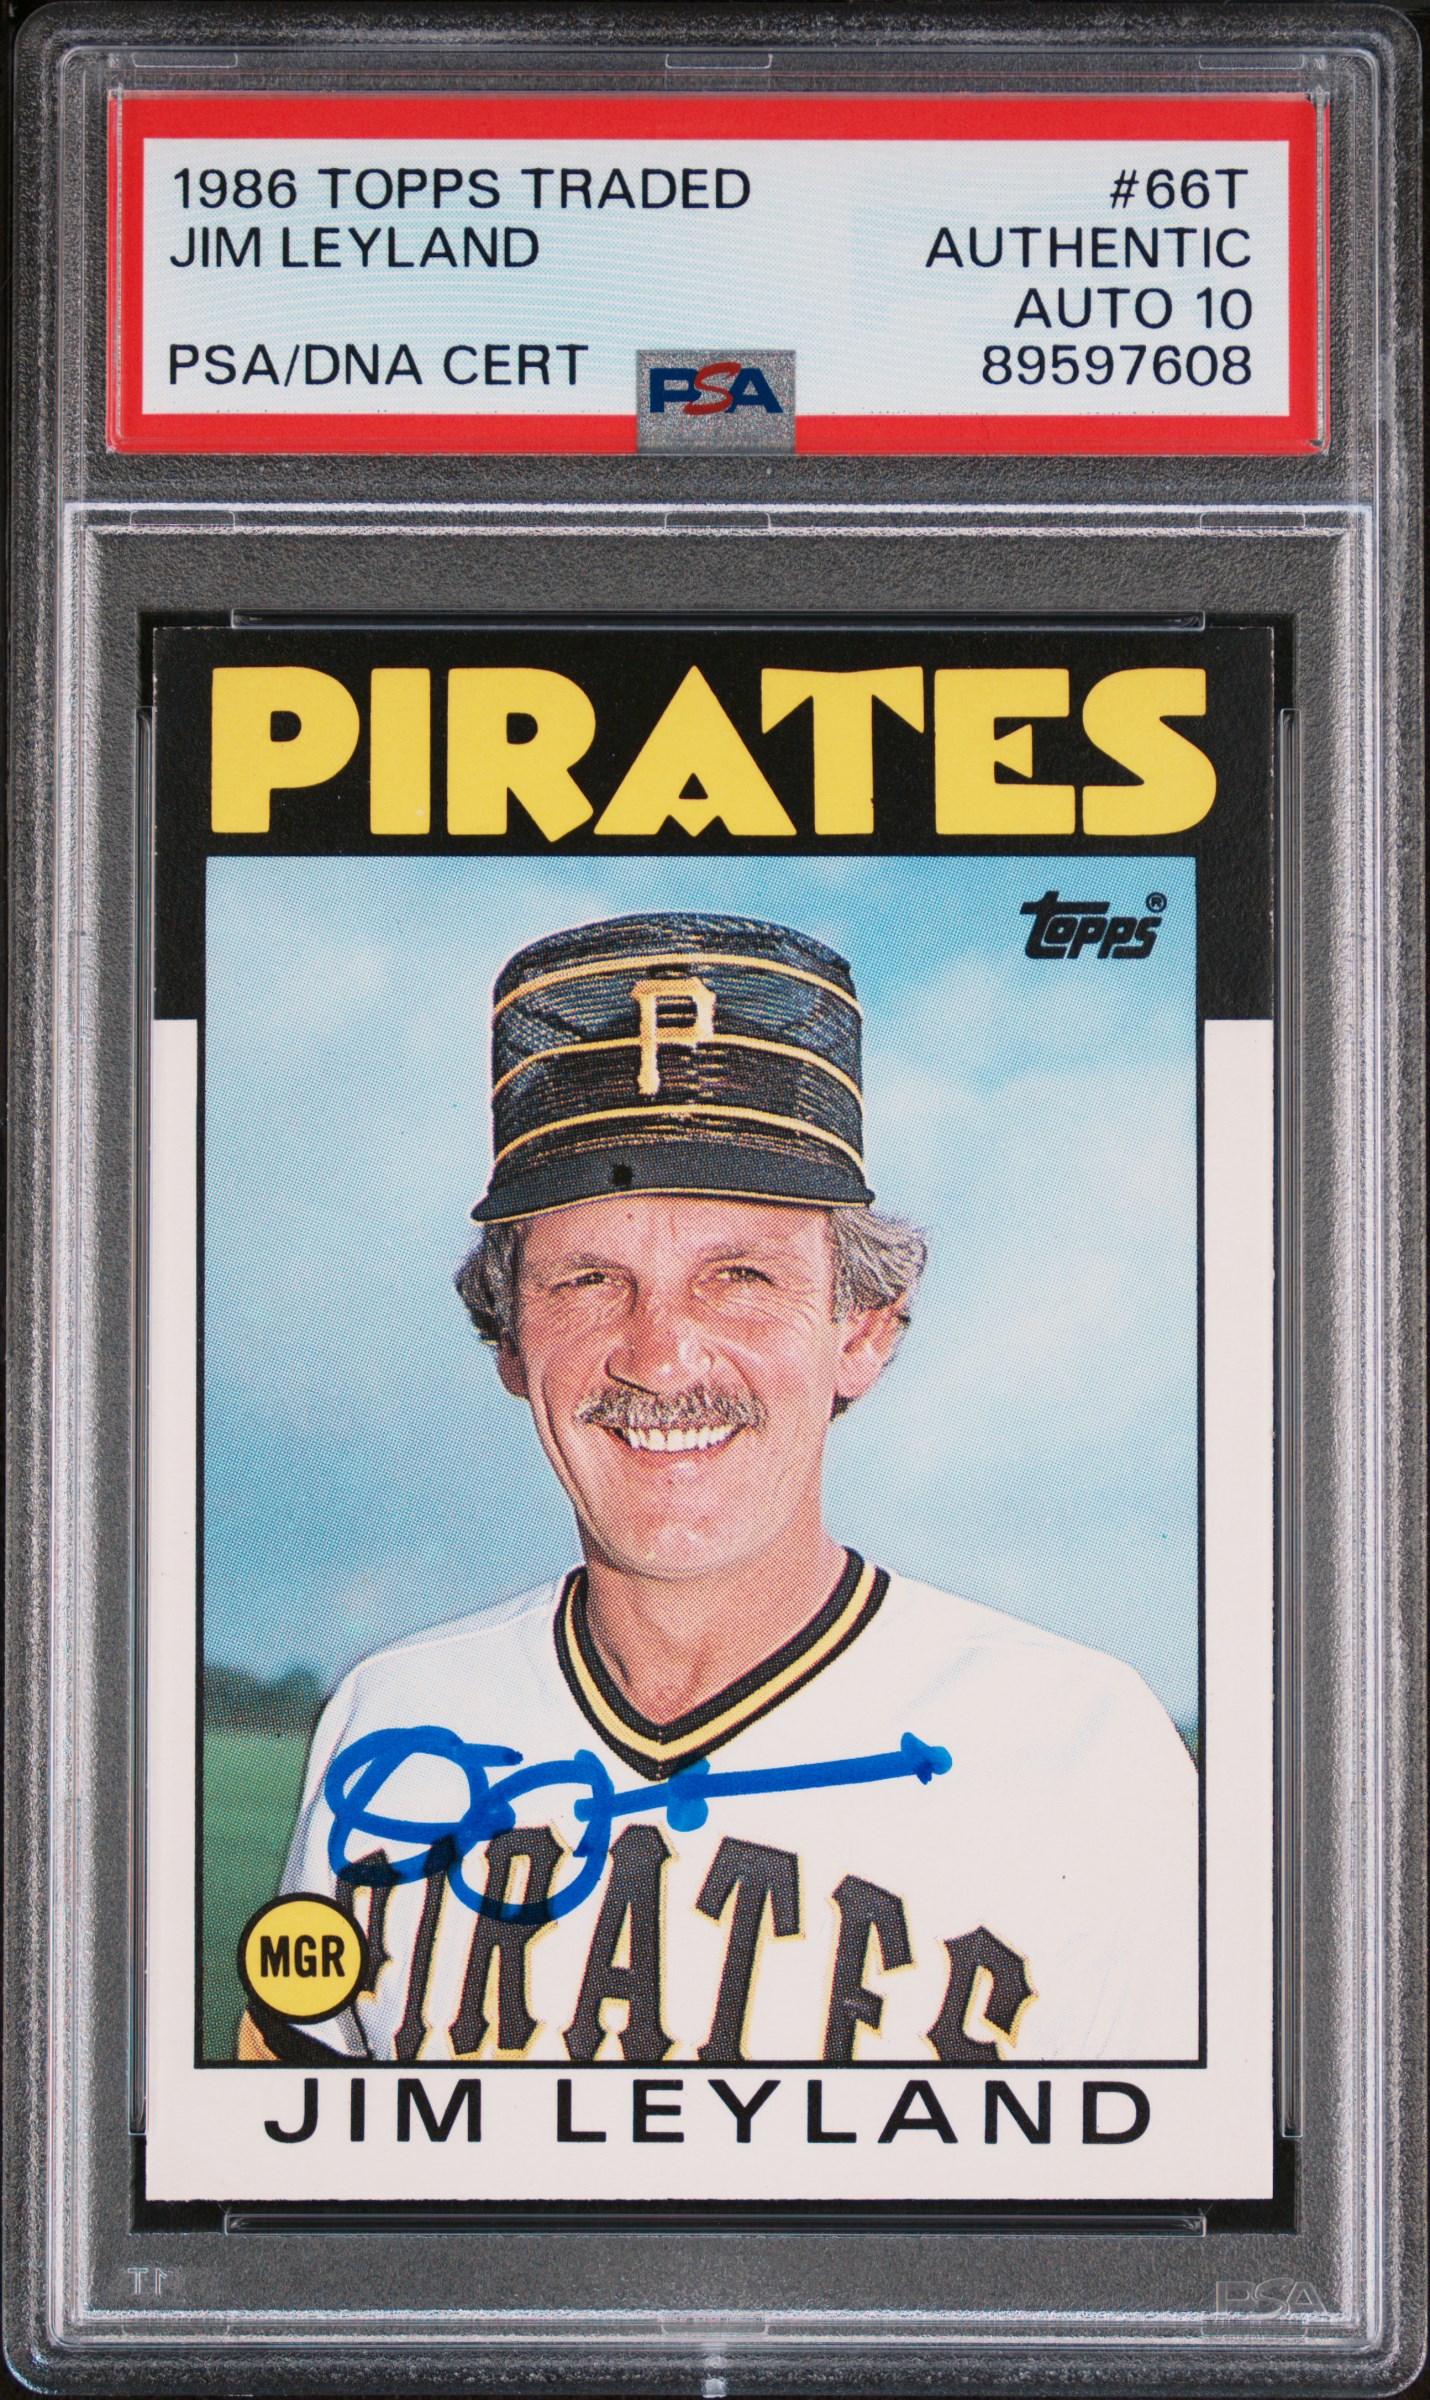 Jim Leyland 1986 Topps Traded Signed Baseball Rookie Card #66T Auto PSA 10